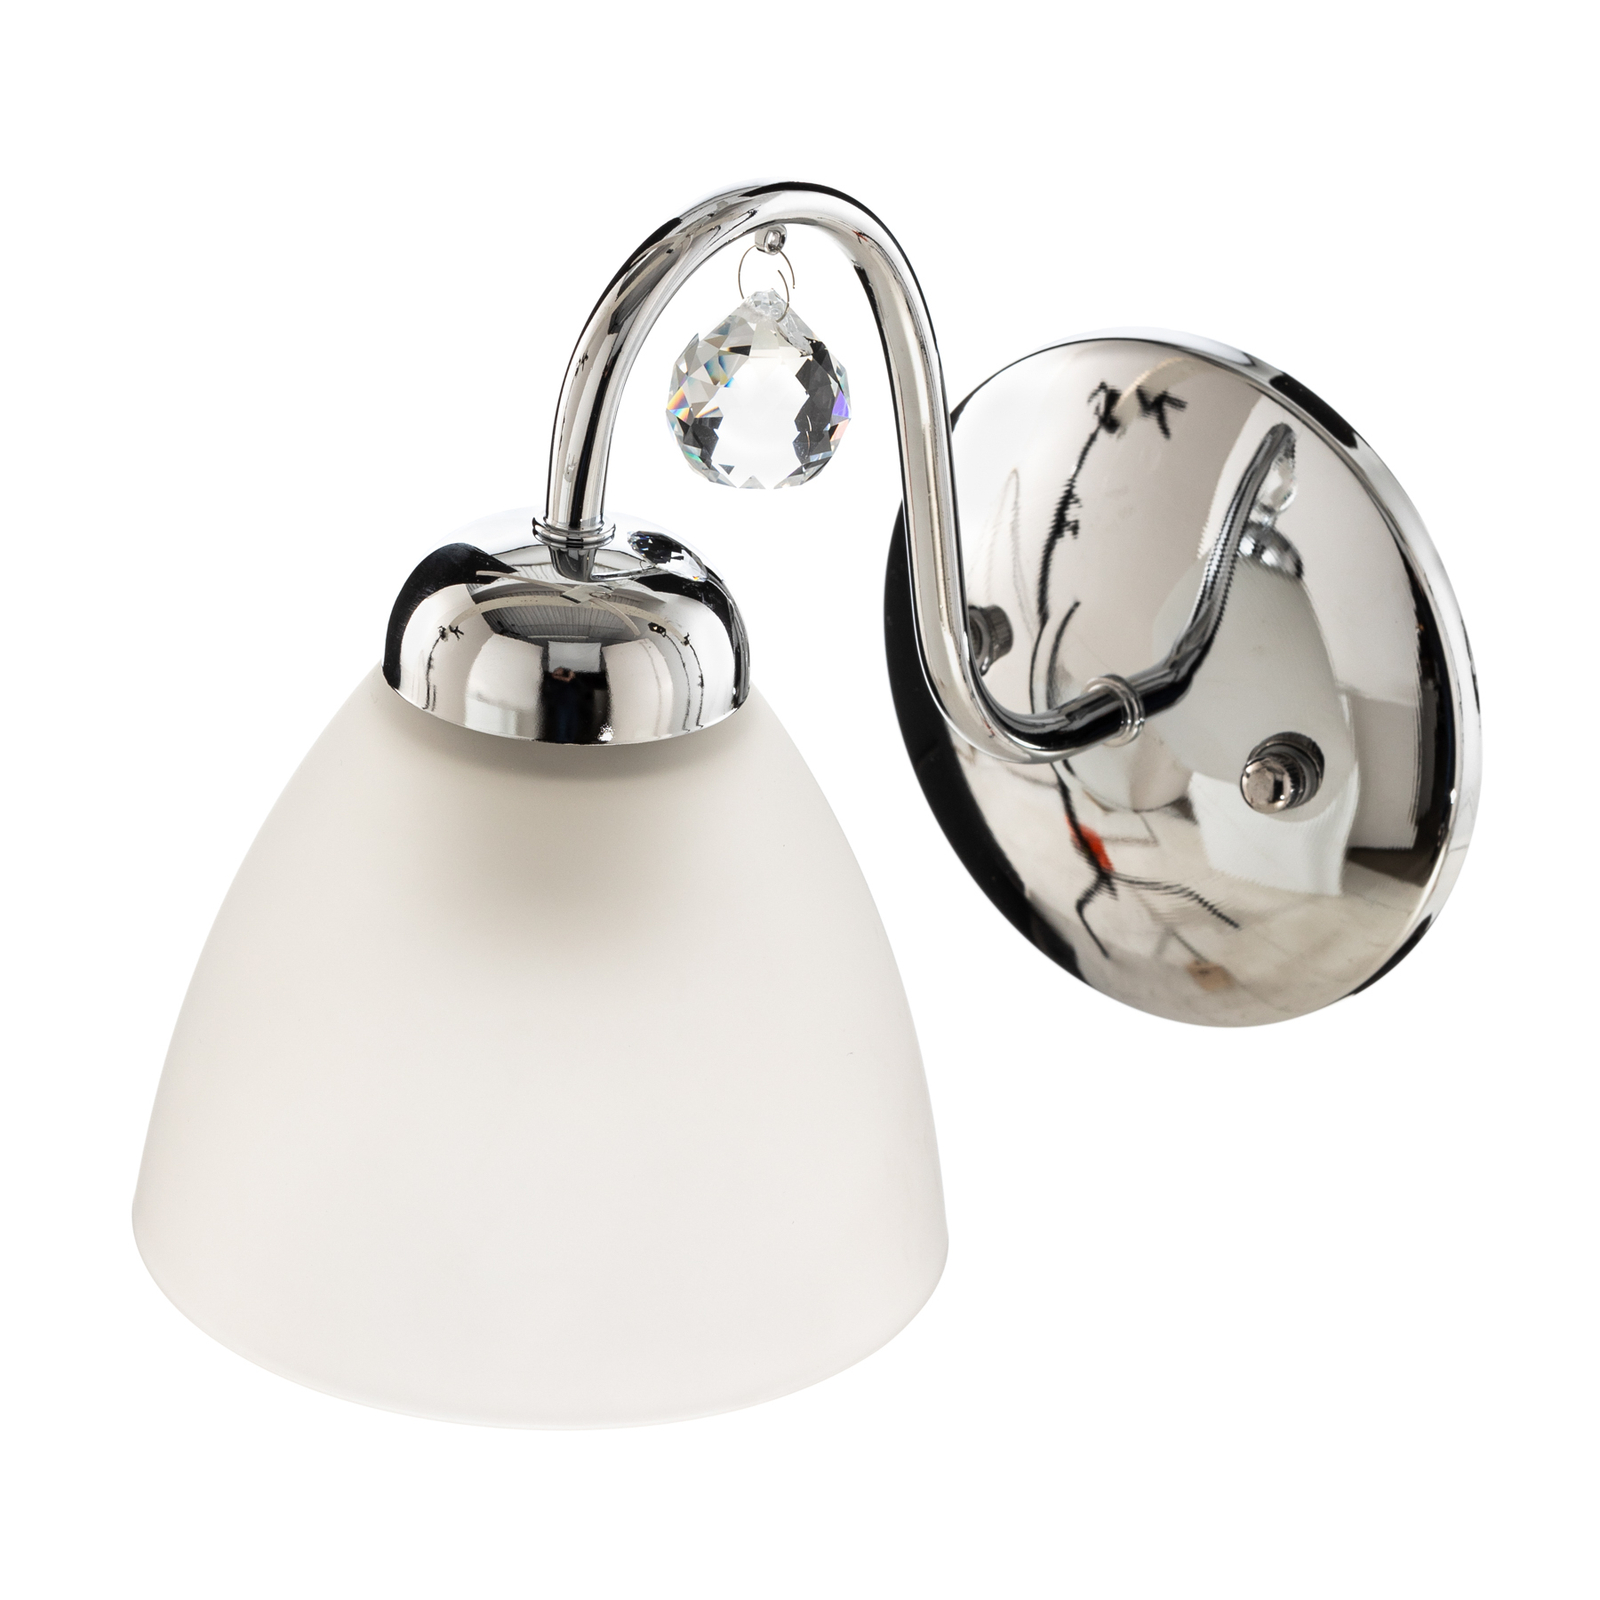 Miranda wall light with a glass lampshade, chrome